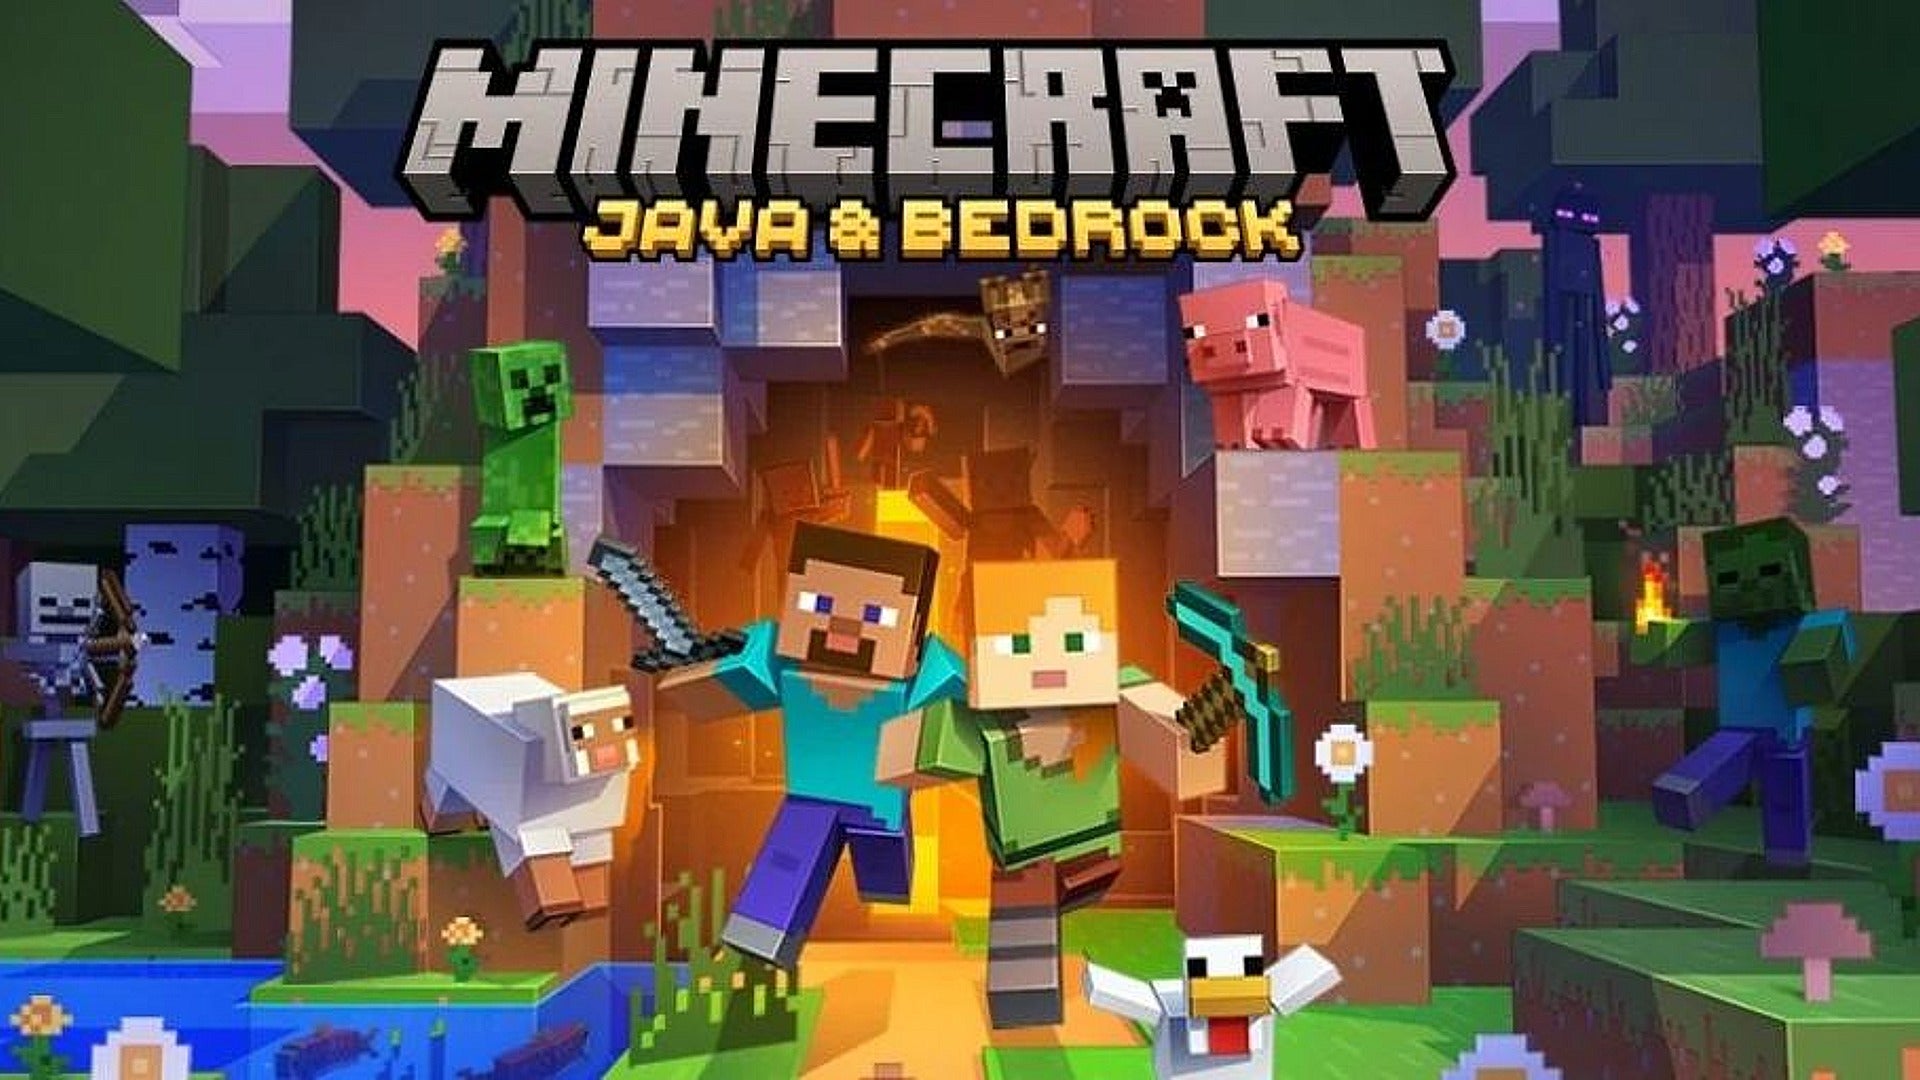 Minecraft's Bedrock and Java editions are being bundled together starting from June 7th 2022.